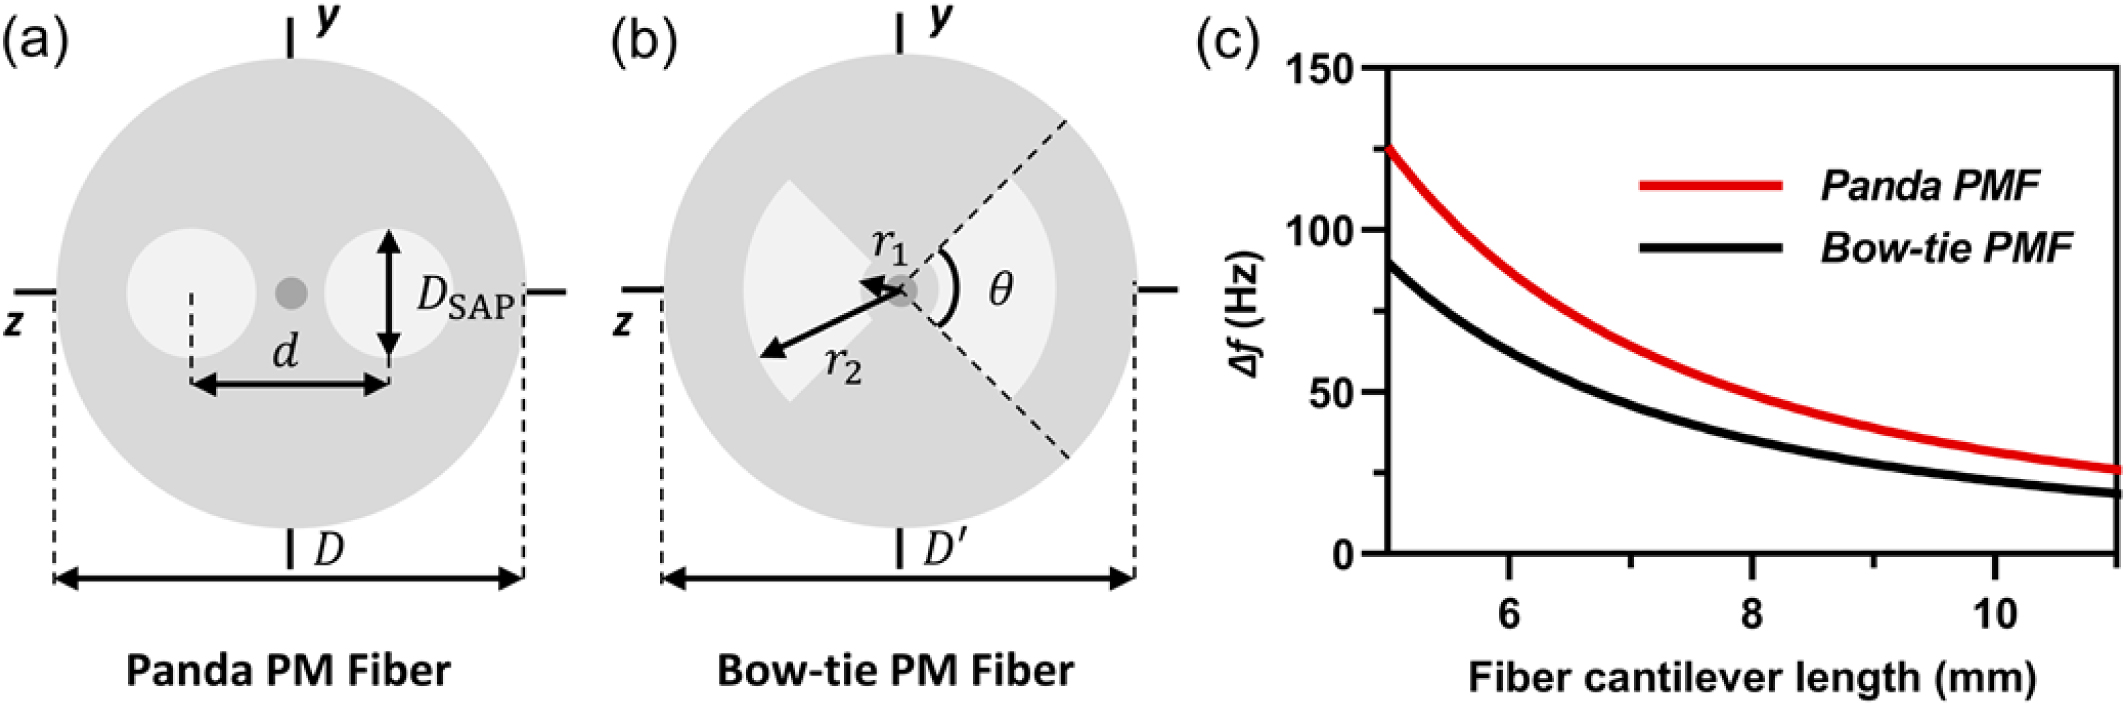 Diagrams of the cross sections of the panda and bow-tie PMFs and their first-order natural frequency differences. (a) Cross section of panda PMF, where D, DSAP, and d are the cladding diameter, diameter of the SAPs, and center distance between the two SAPs, respectively. (b) Cross section of the bow-tie PMF, where r1, r2, D′, and θ are the inner and outer diameters of the SAPs, cladding diameter, and angle of the SAPs, respectively. (c) Difference in the first-order natural frequencies of the vibrations along the y-axis and z-axis of the panda and bow-tie PMFs versus the fiber cantilever length.